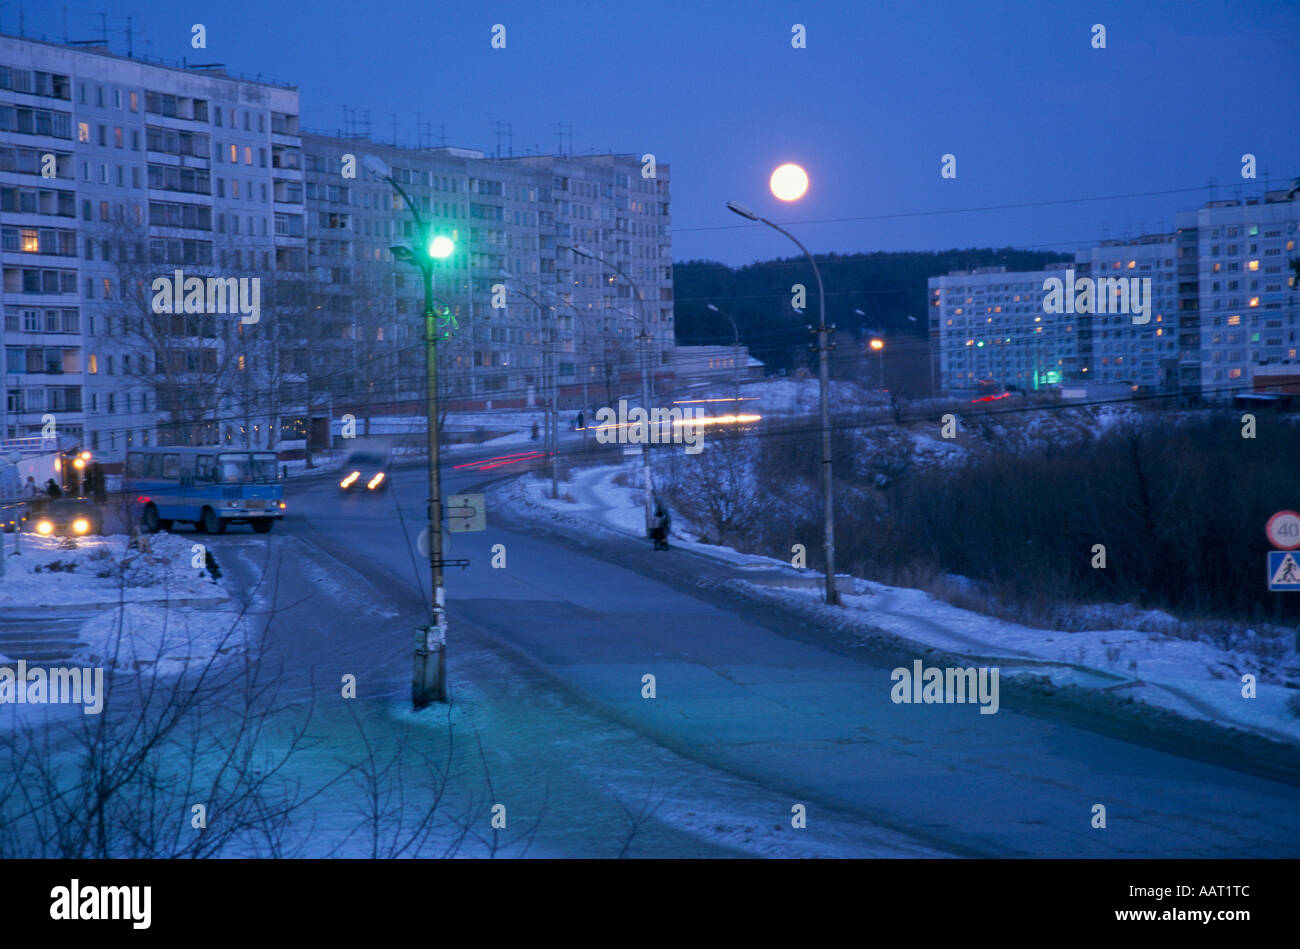 NOVOSIBIRSK CENTRAL SIBERIA THE FULL MOON HANGS ABOVE THE STREETS OF AKADEMGORODOK DURING THE WINTER Stock Photo